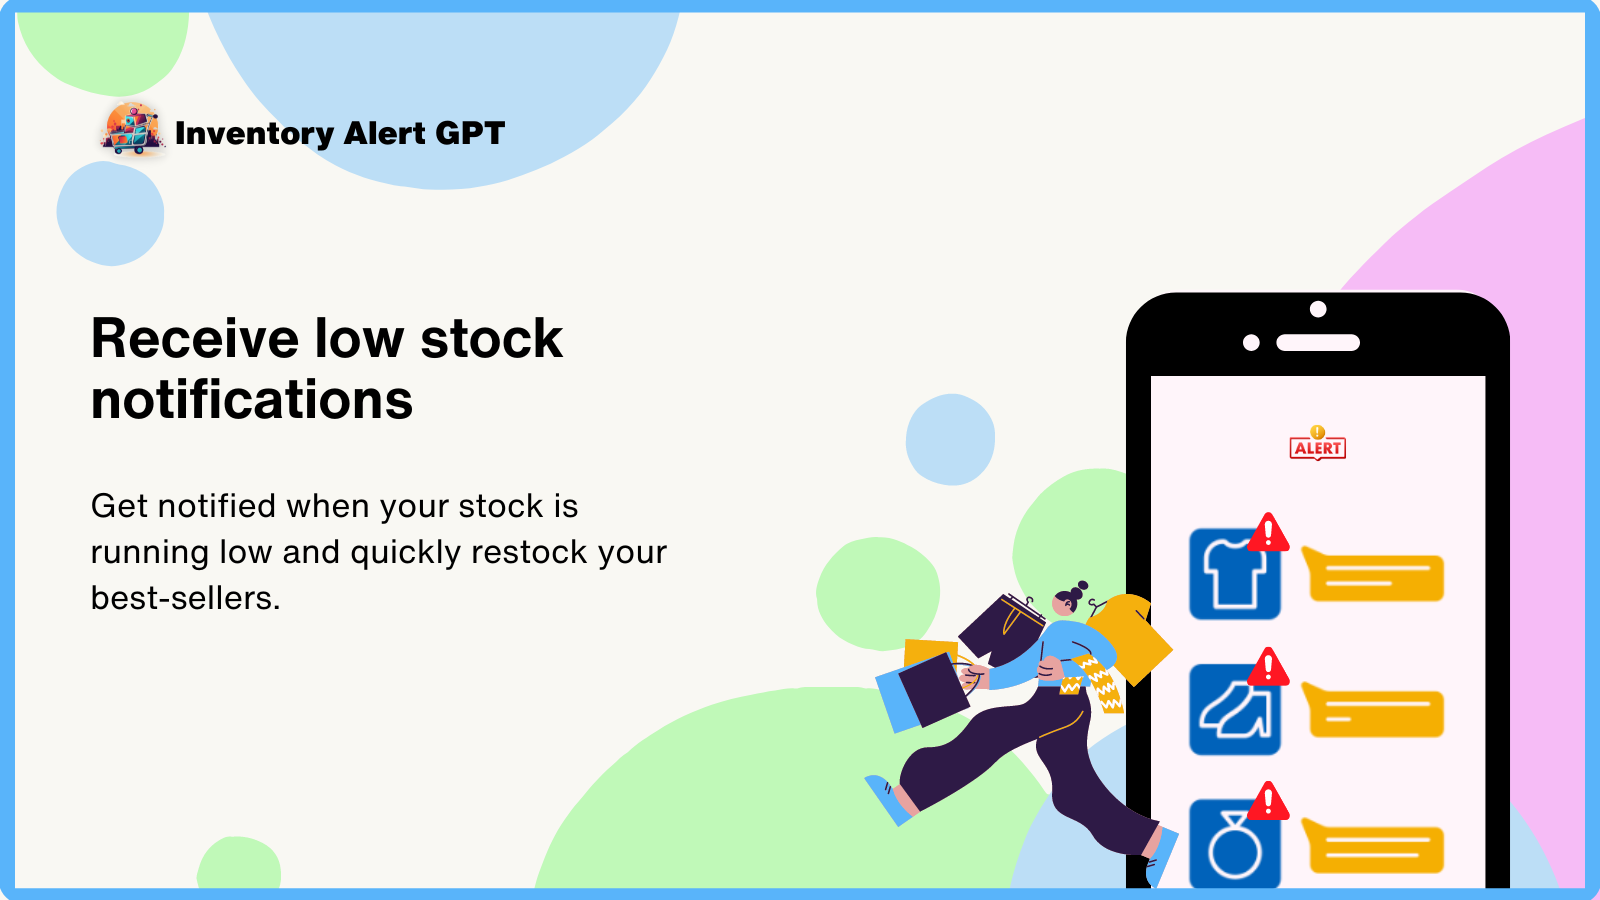 Receive real-time stock alerts to prevent stockouts & overstock